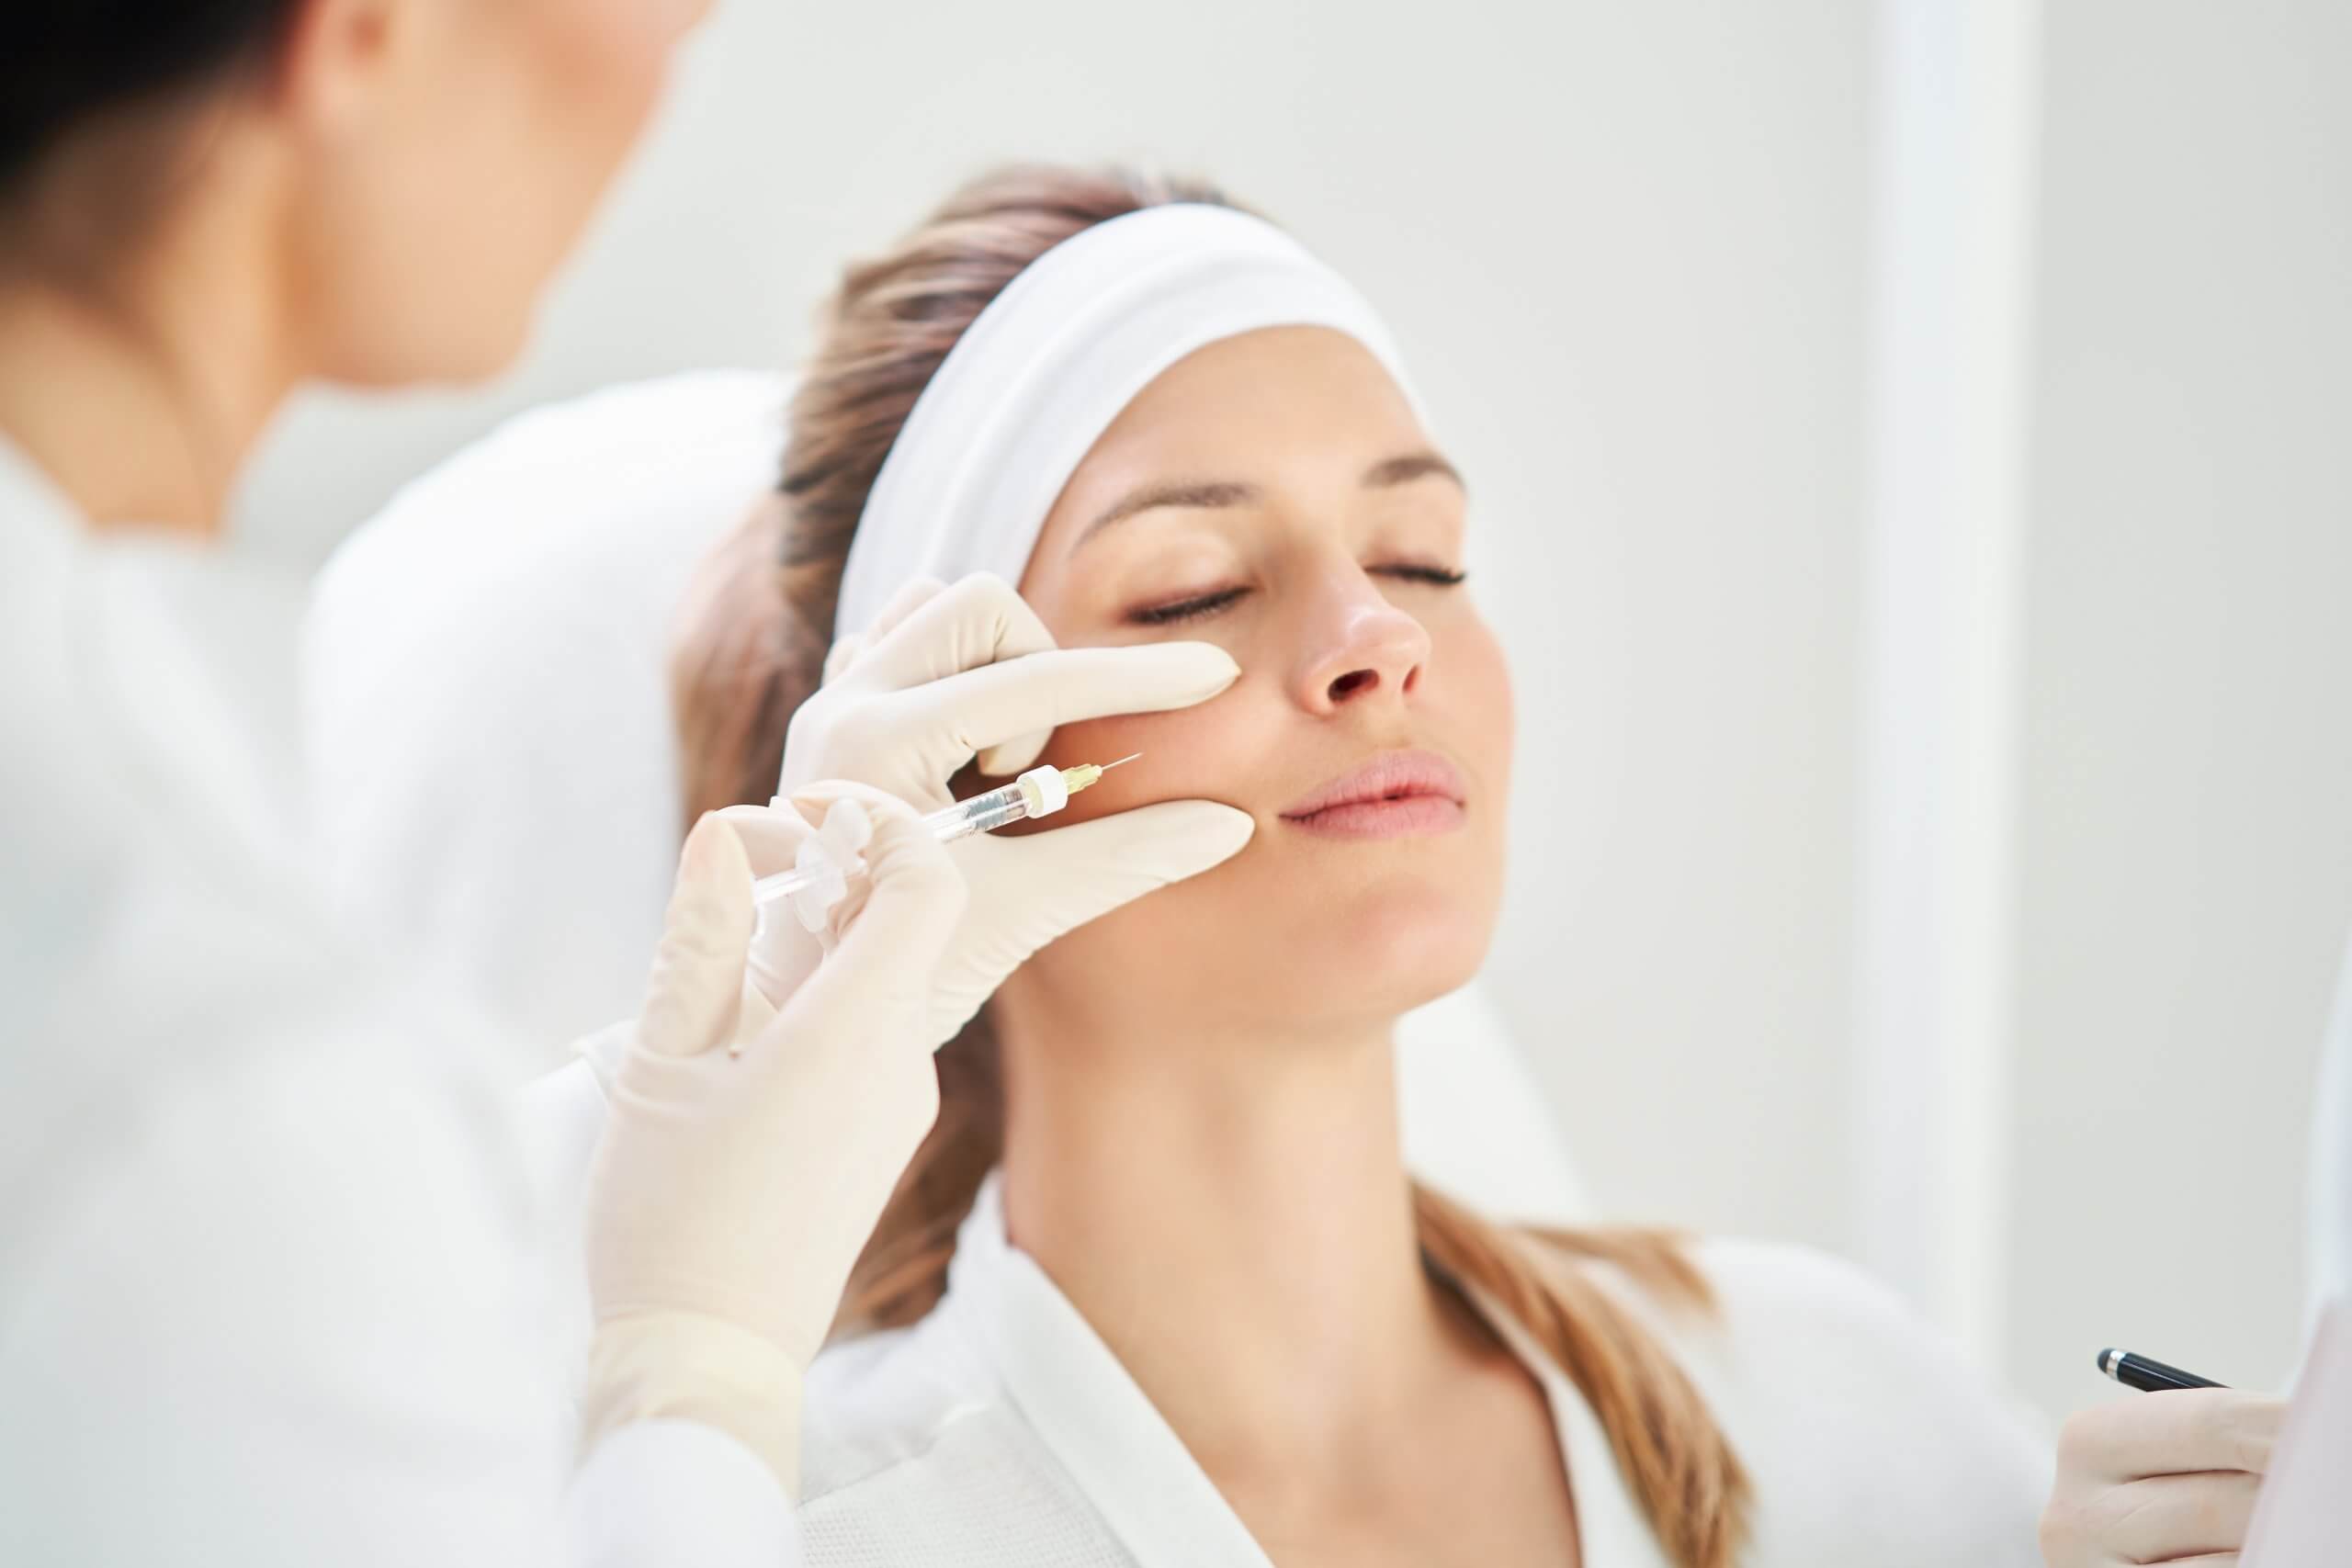 woman receiving Botox injections as training for cosmetic injectors